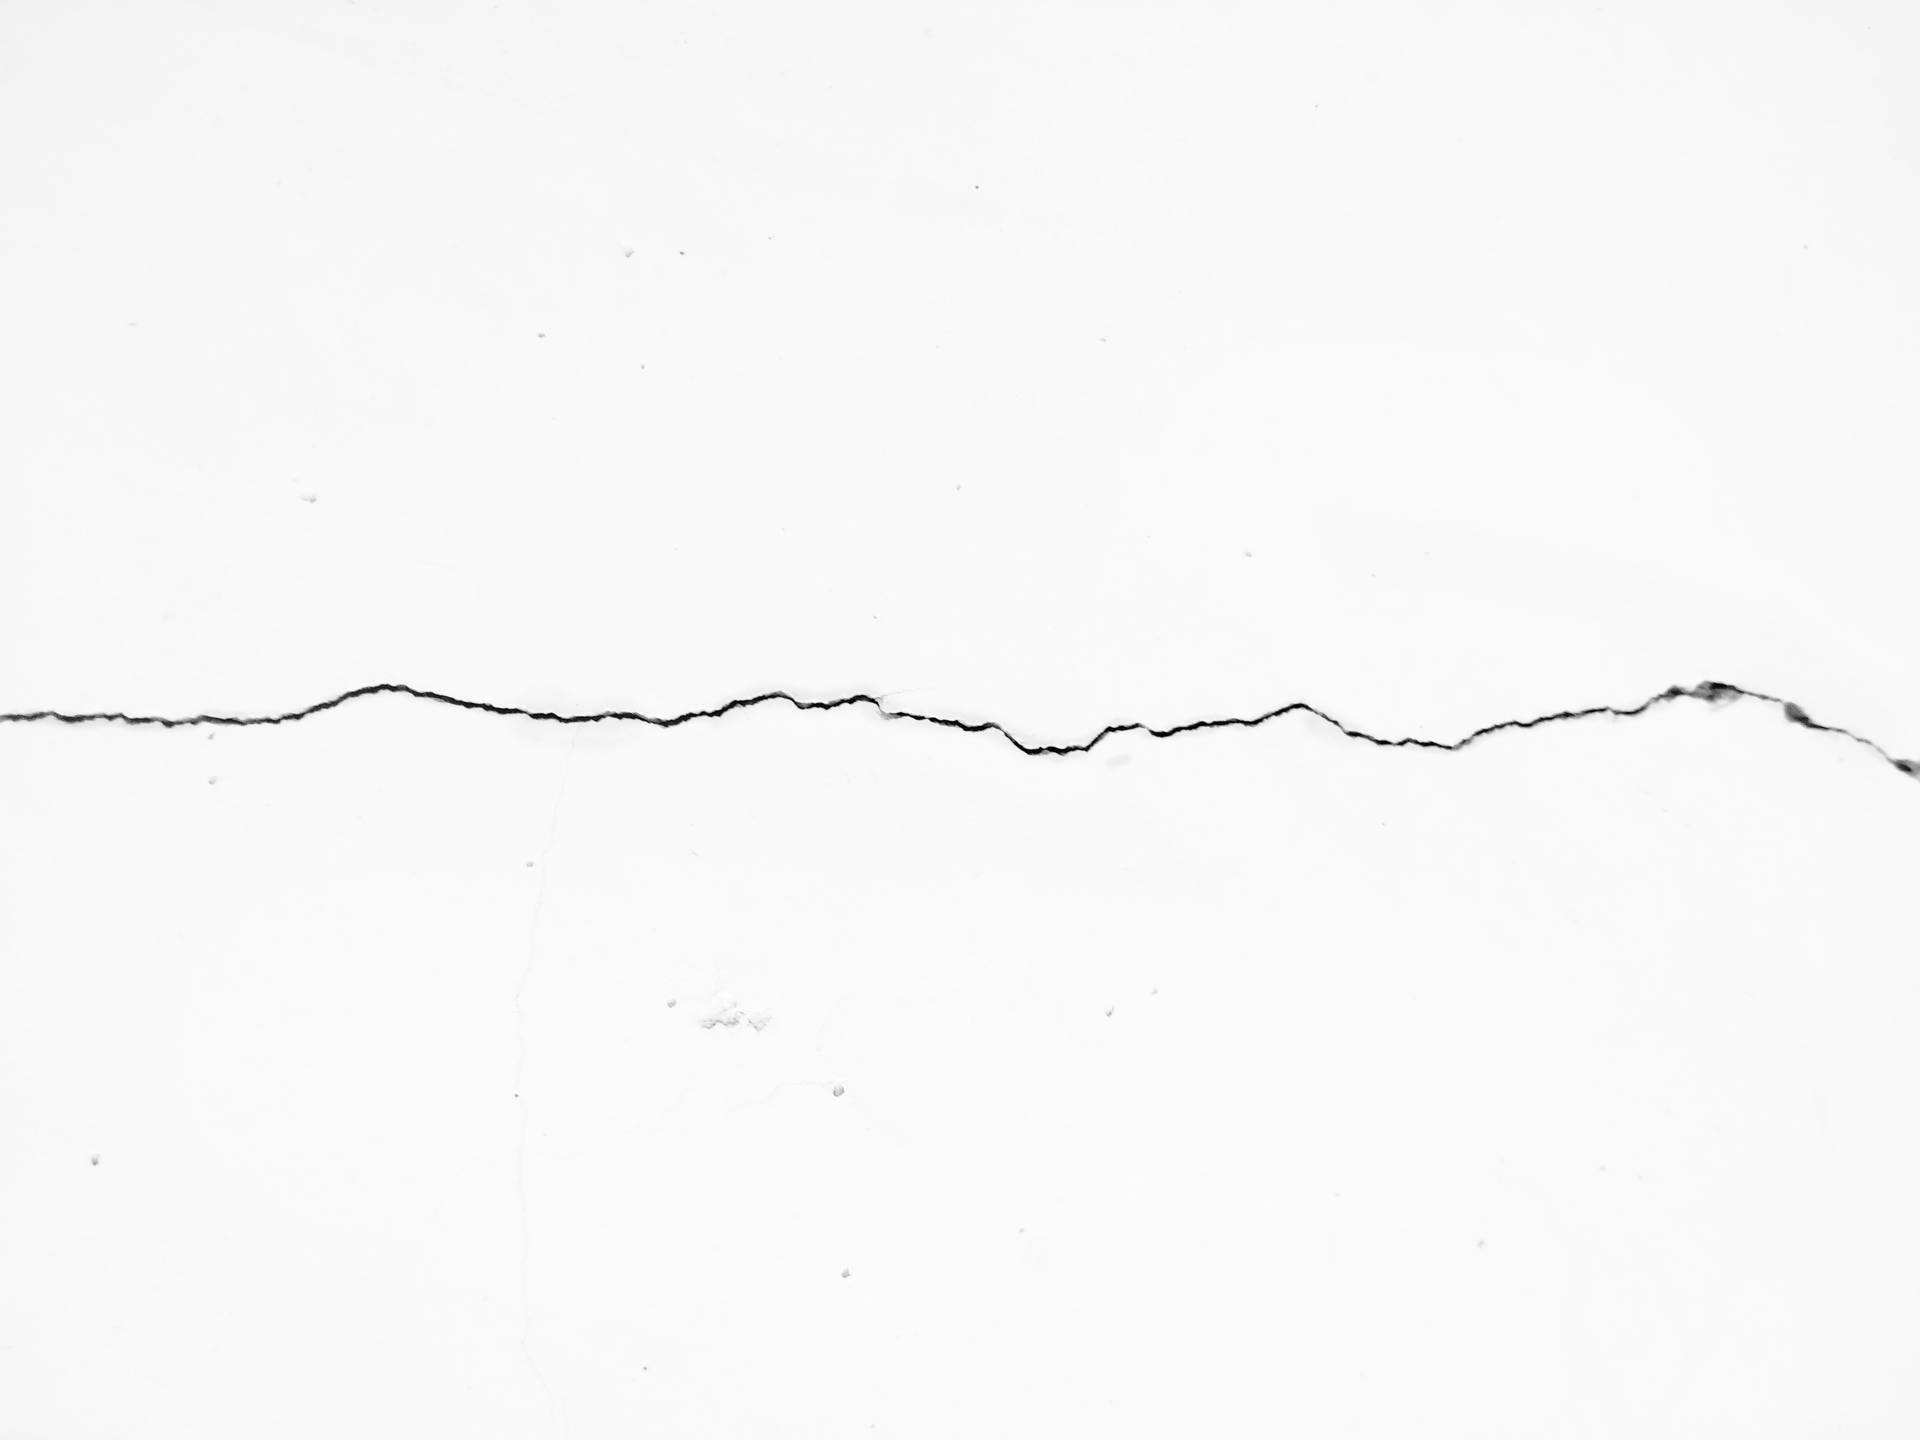 Minimalist wallpaper of cracked black line on pure solid white concrete wall.  